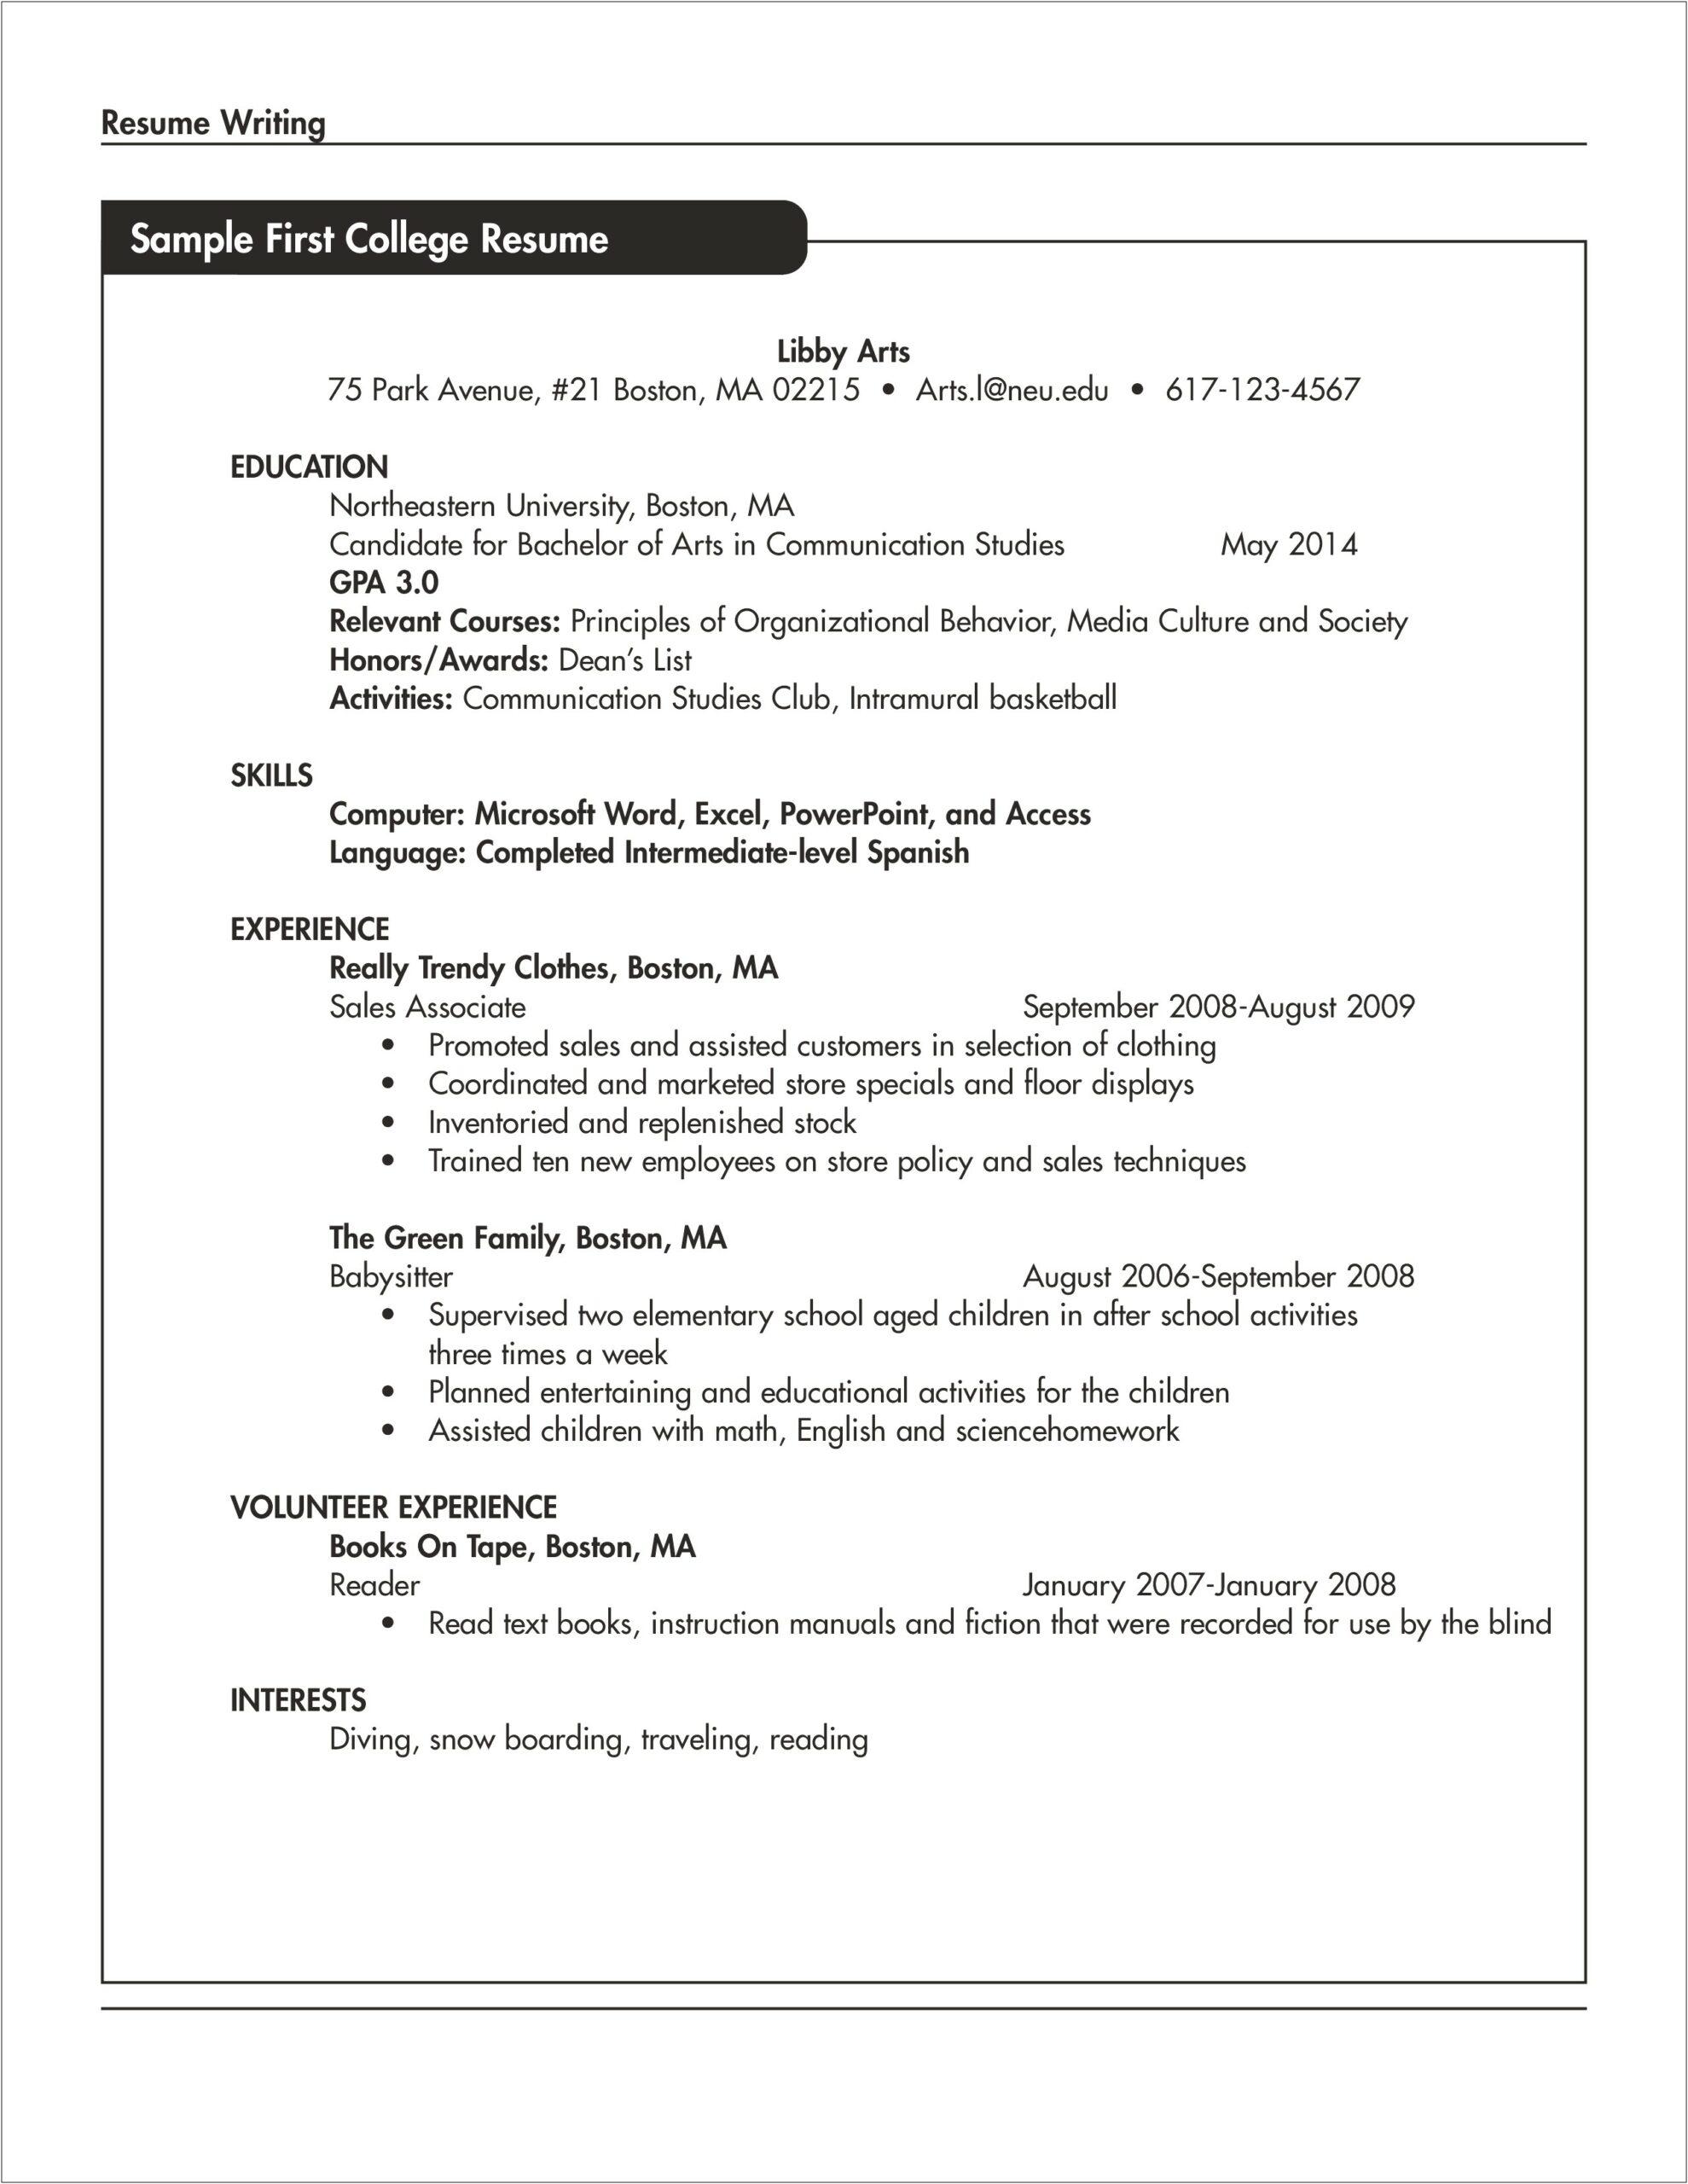 Sample Resume For Students Applying To College